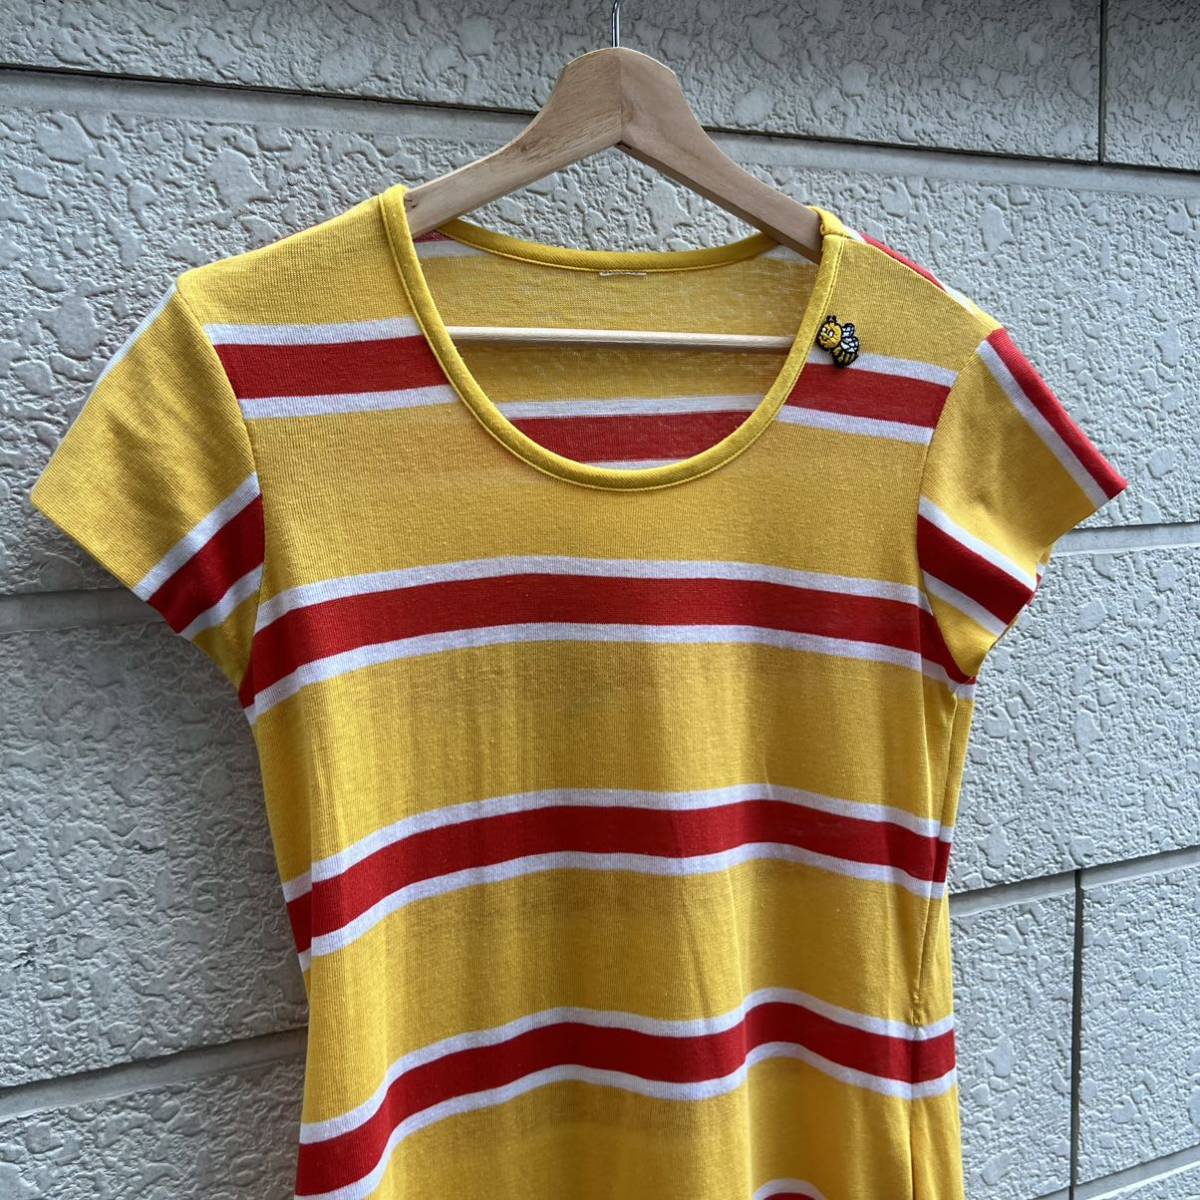 70s 80s USA古着 ボーダー柄 カットソーワンピース ボーダーワンピース Tシャツ アメリカ古着 vintage ヴィンテージ 黄色 イエロー_画像4